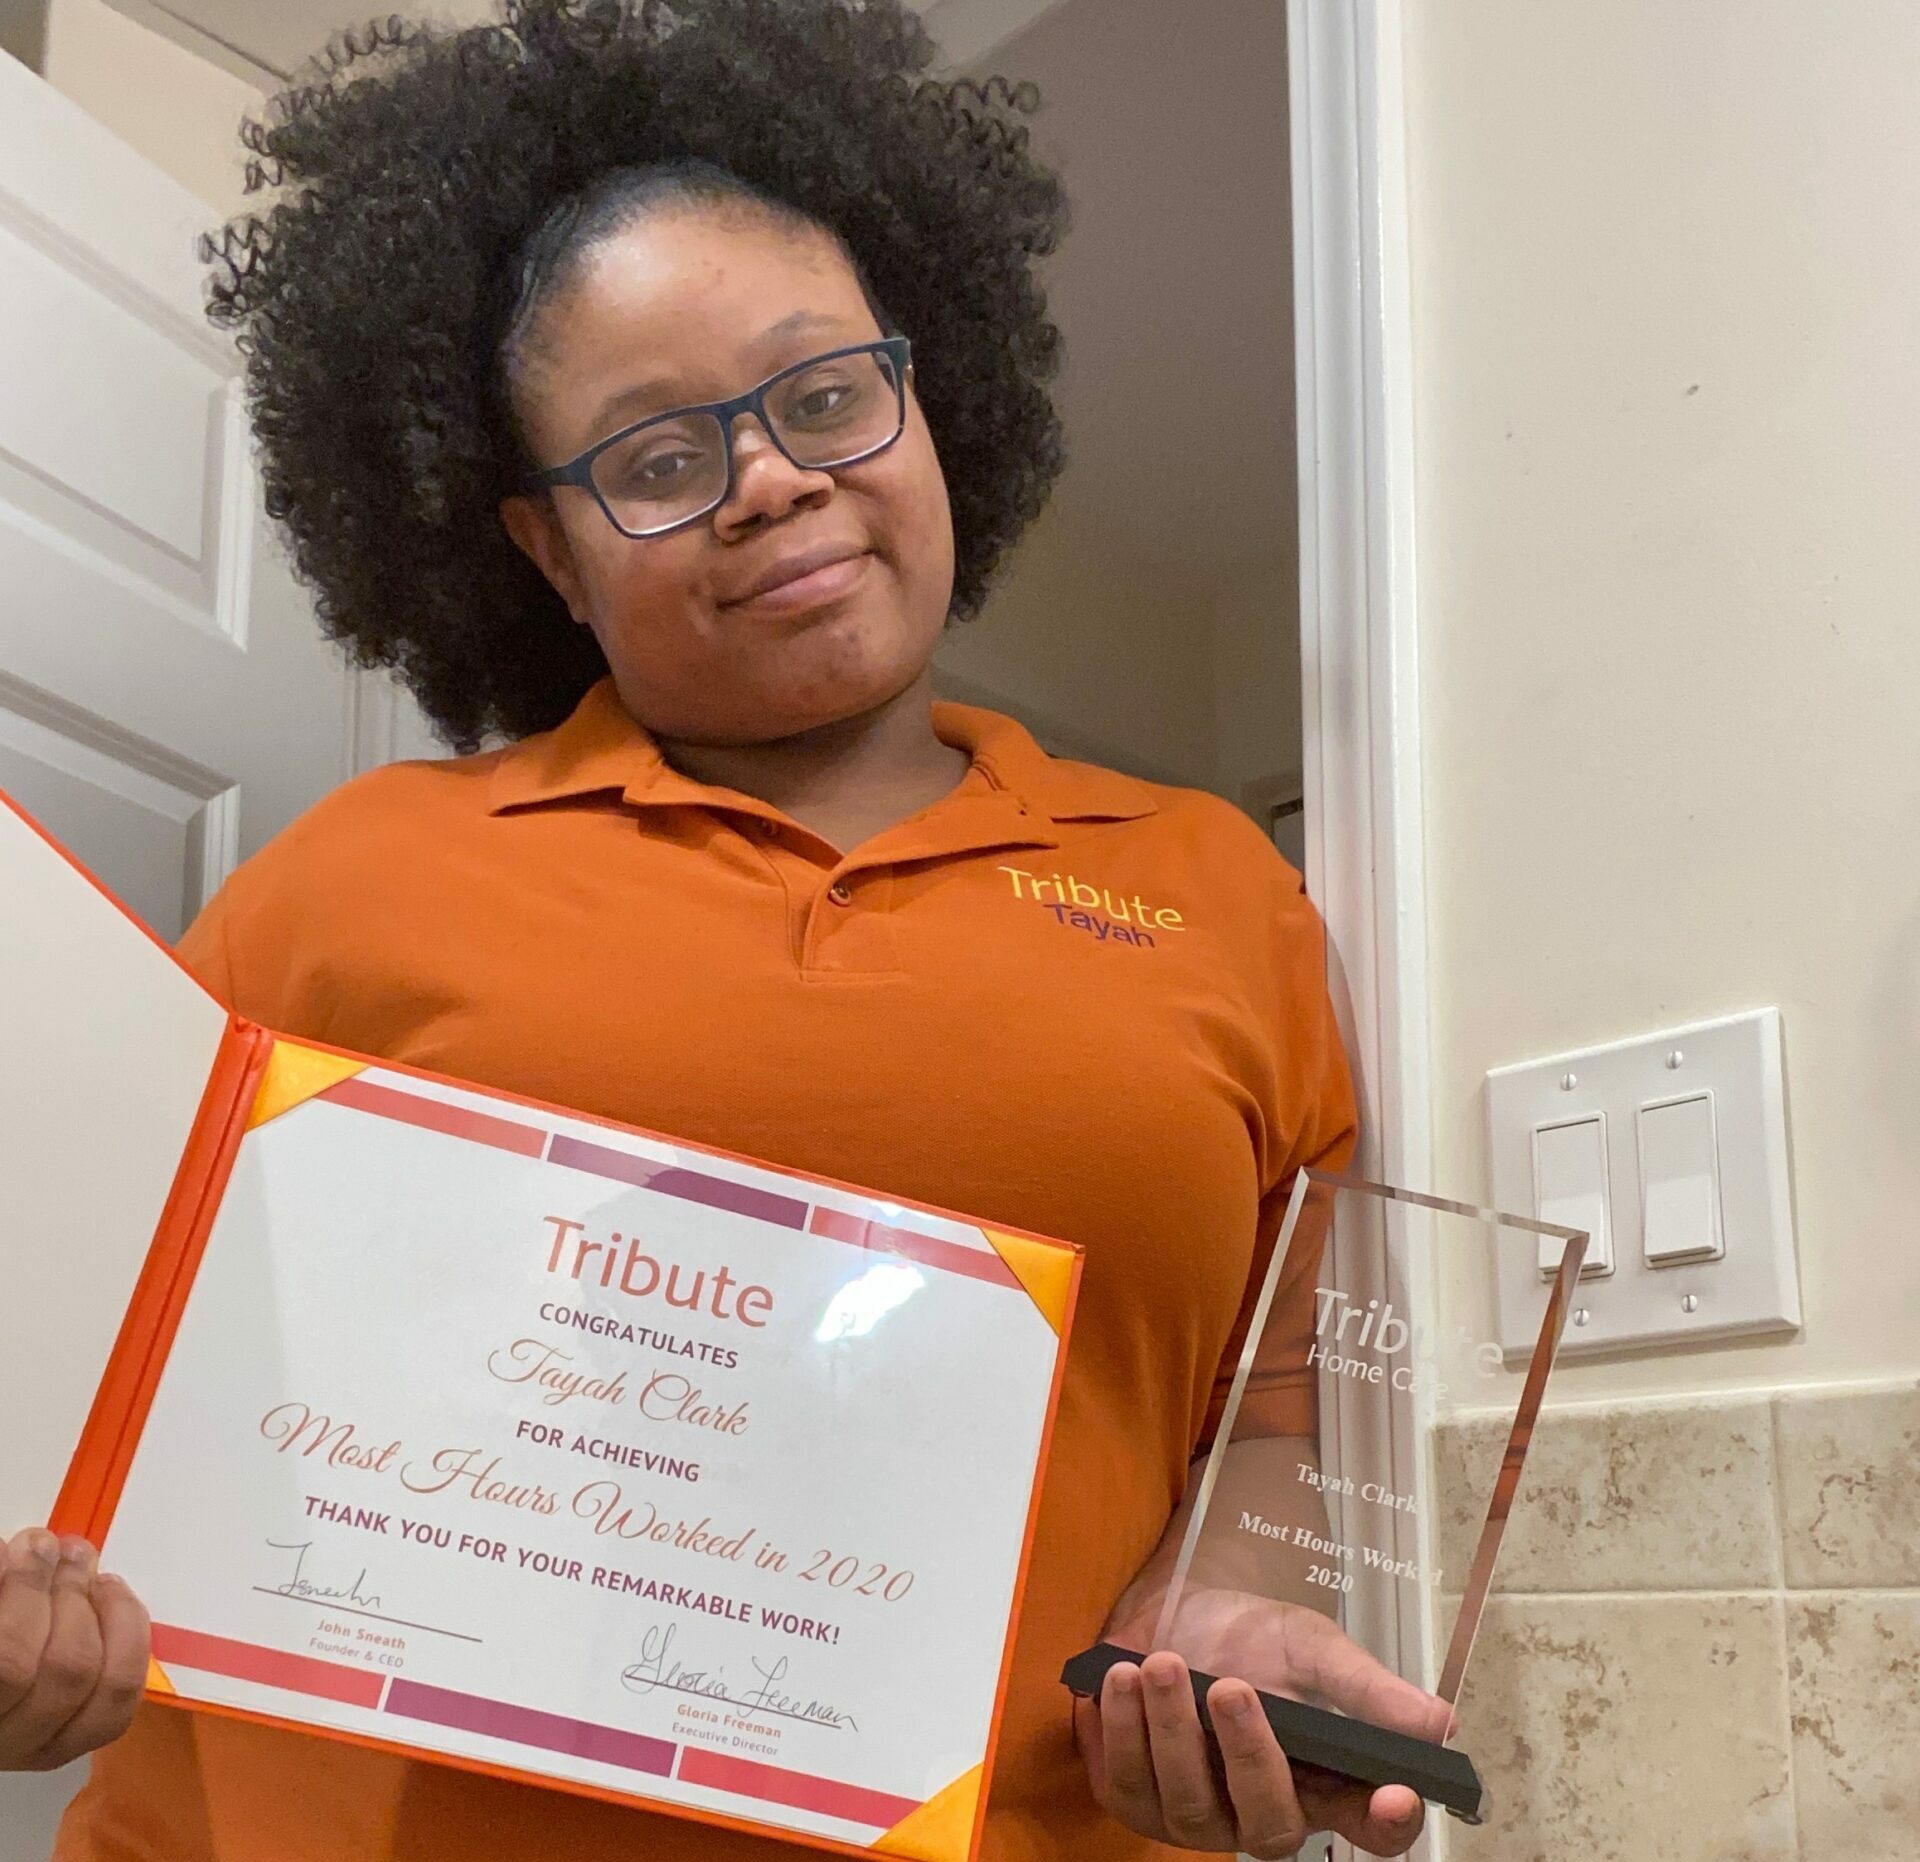 Tribute Caregiver Tayah smiling and holding certificate 